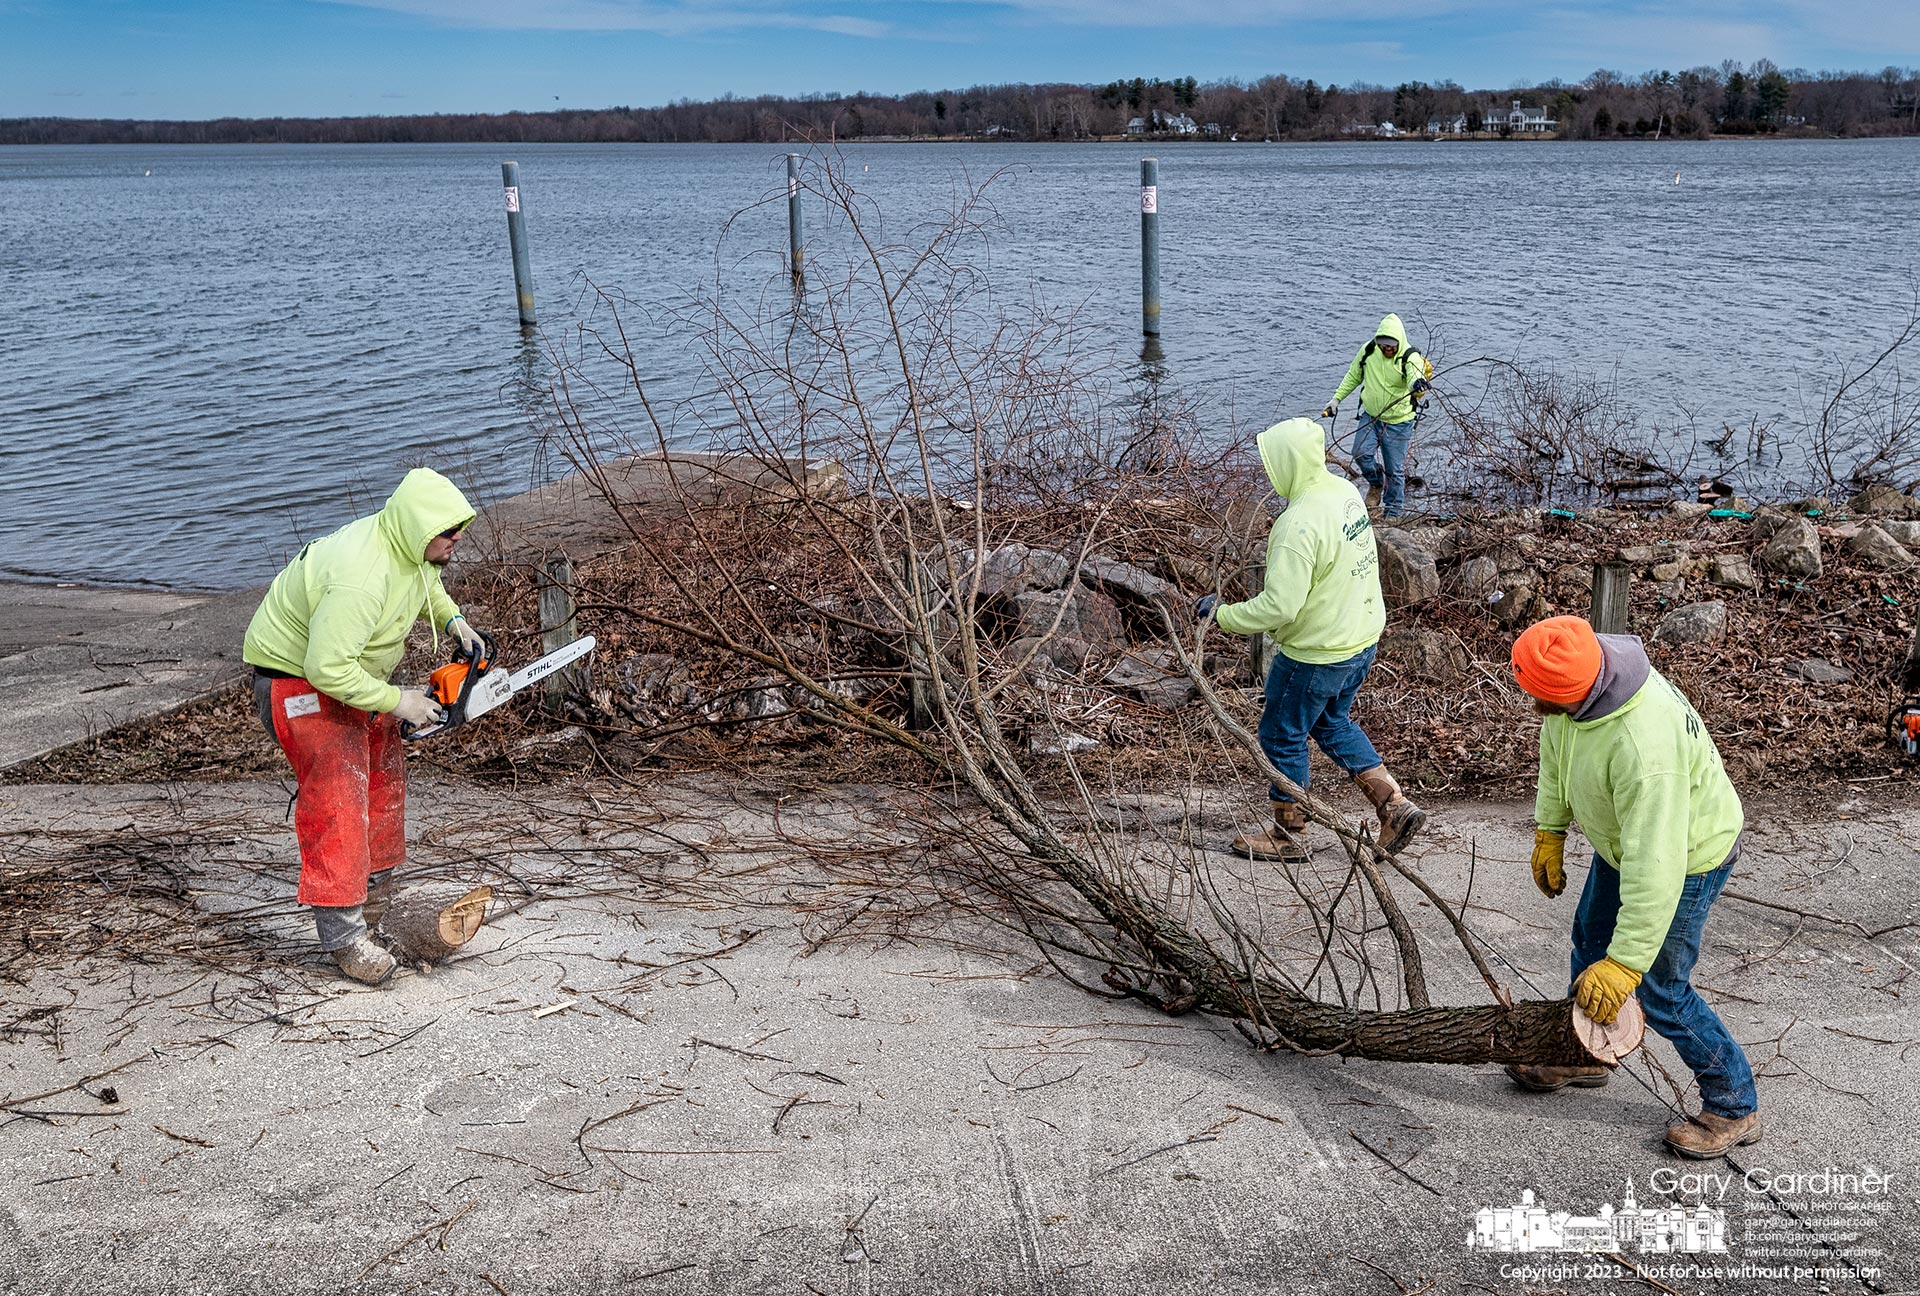 A work crew clears trees and bushes from riprap near the Red Bank boat launch on Hoover Reservoir to clear the rocks of vegetation than can damage its purpose of protecting the shoreline. My Final Photo for February 21, 2023.